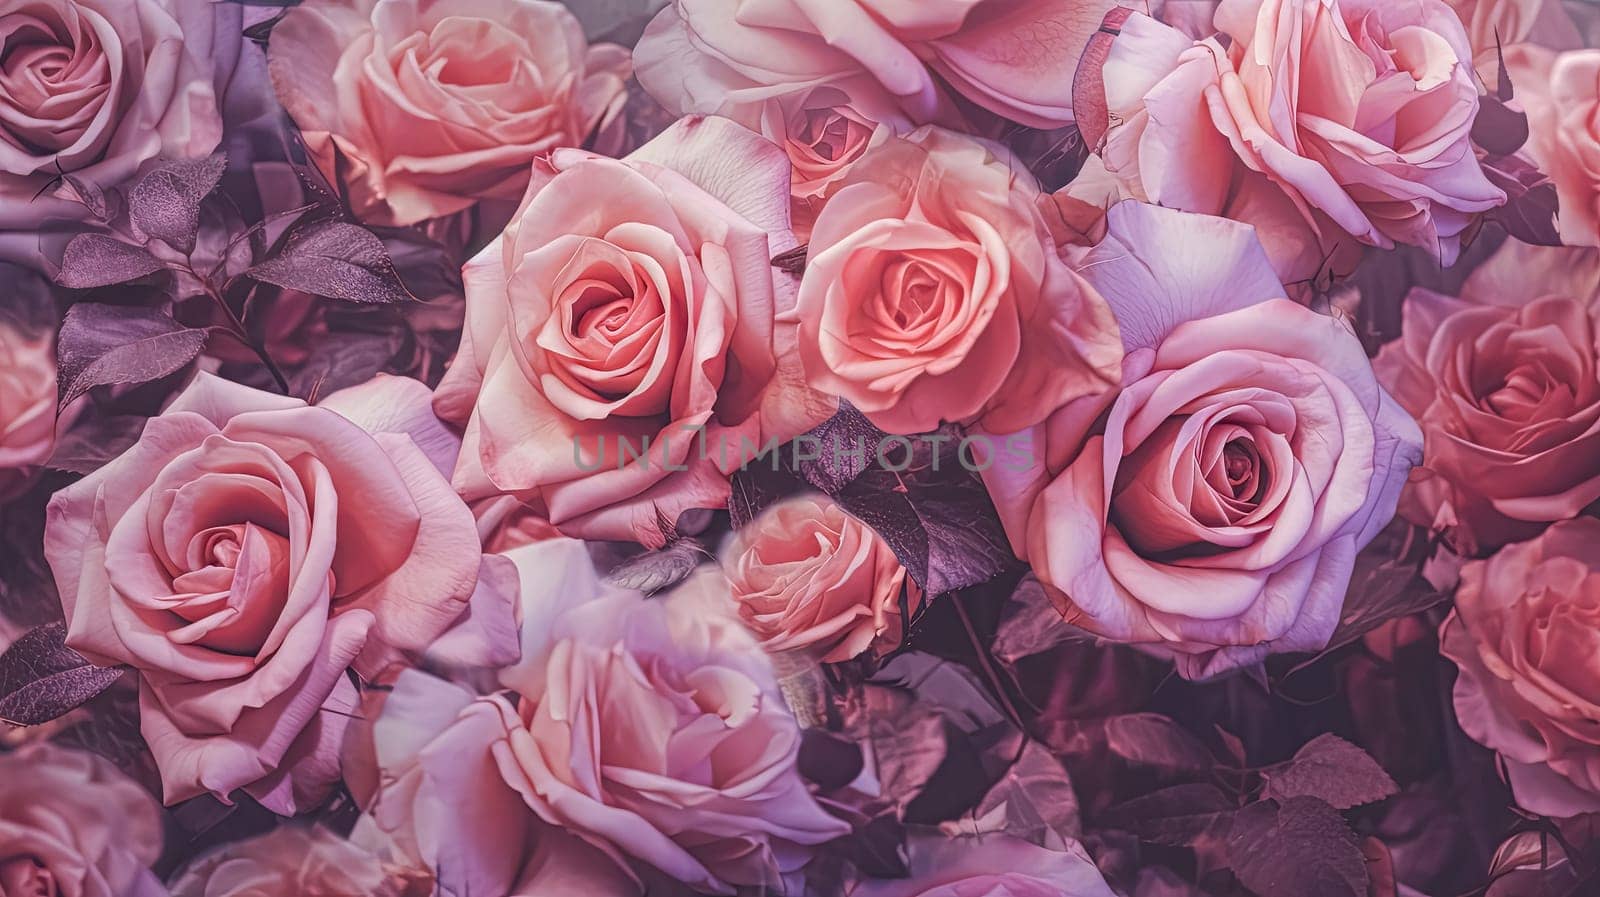 A bouquet of pink roses with a purple background by Alla_Morozova93